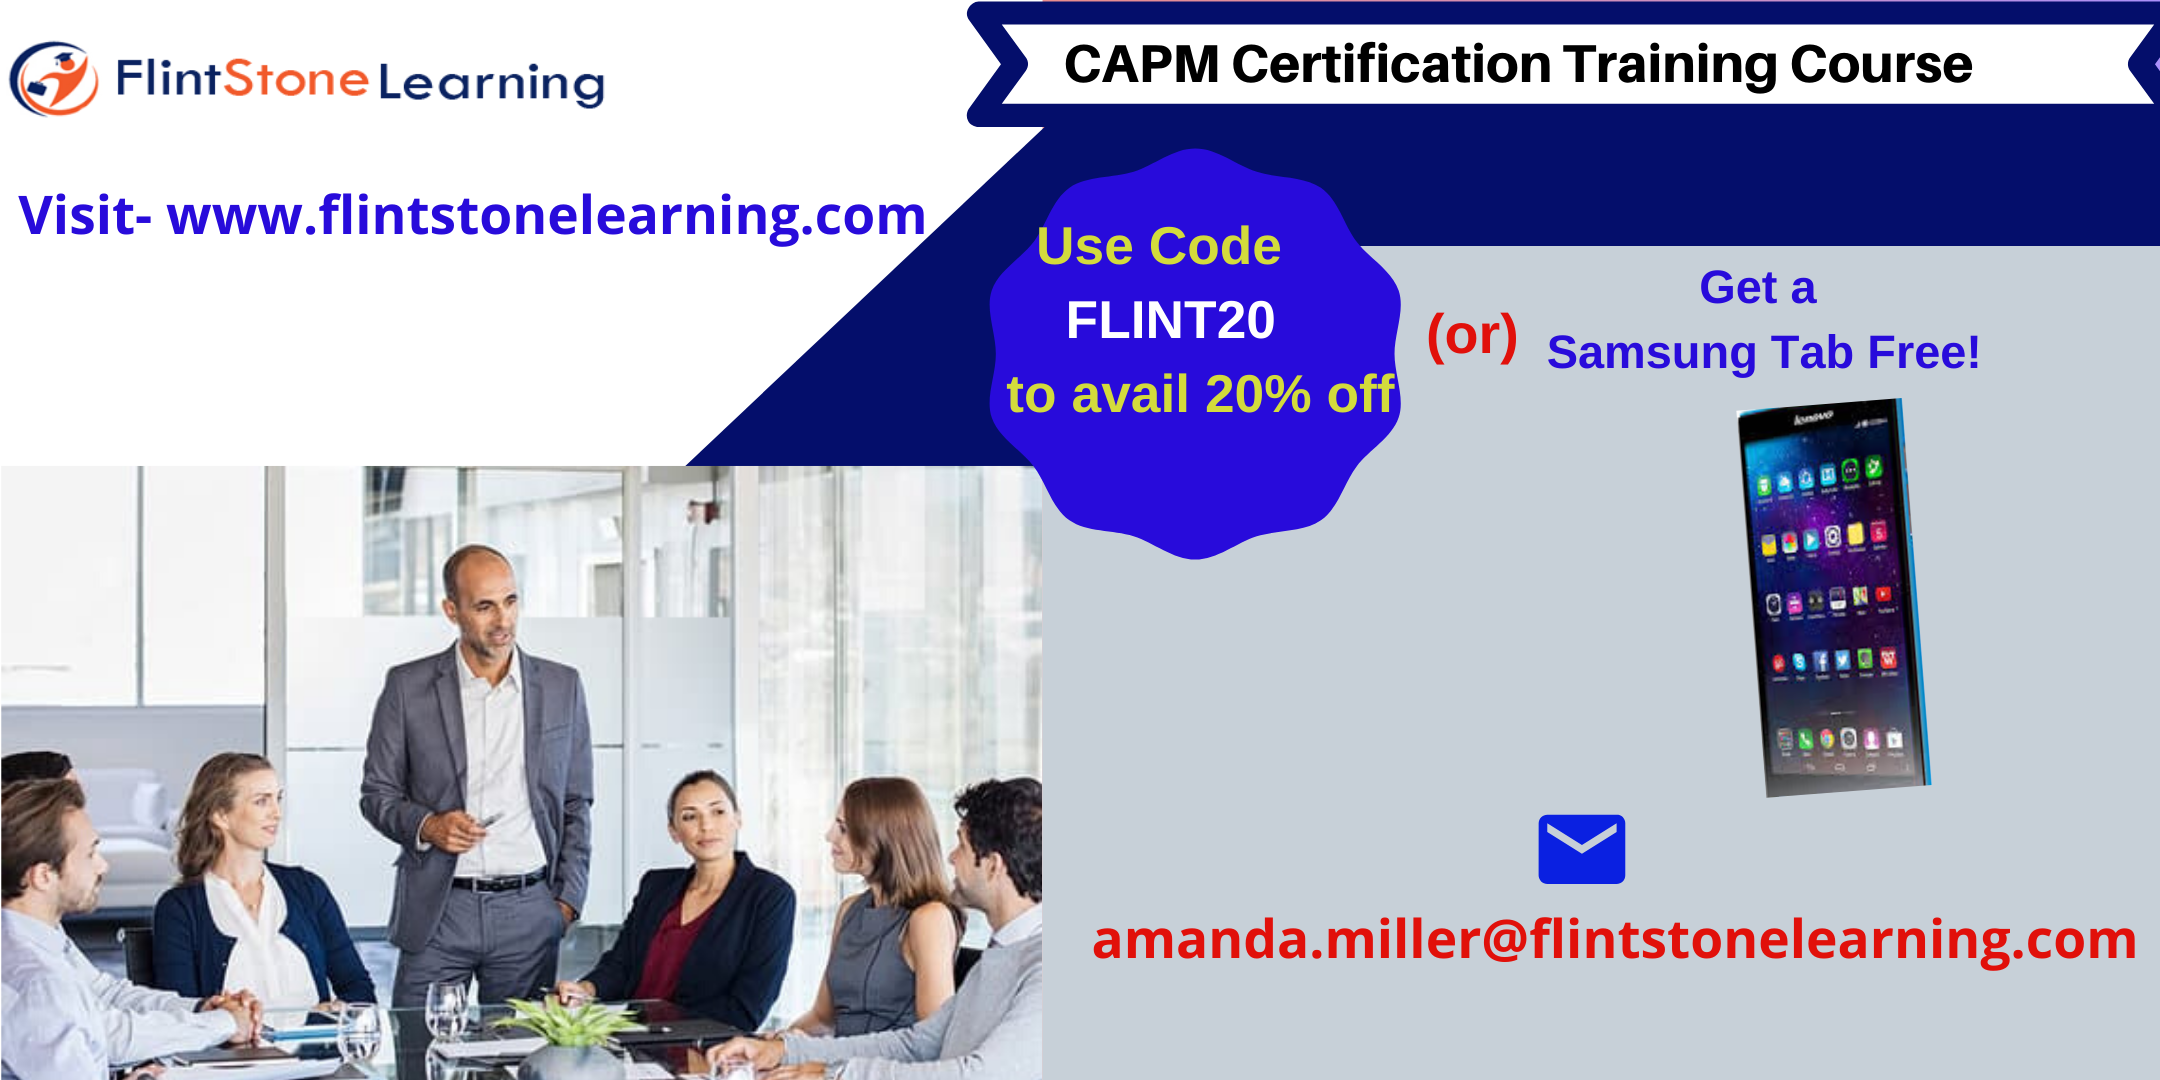 CAPM Certification Training Course in Rochester, MN